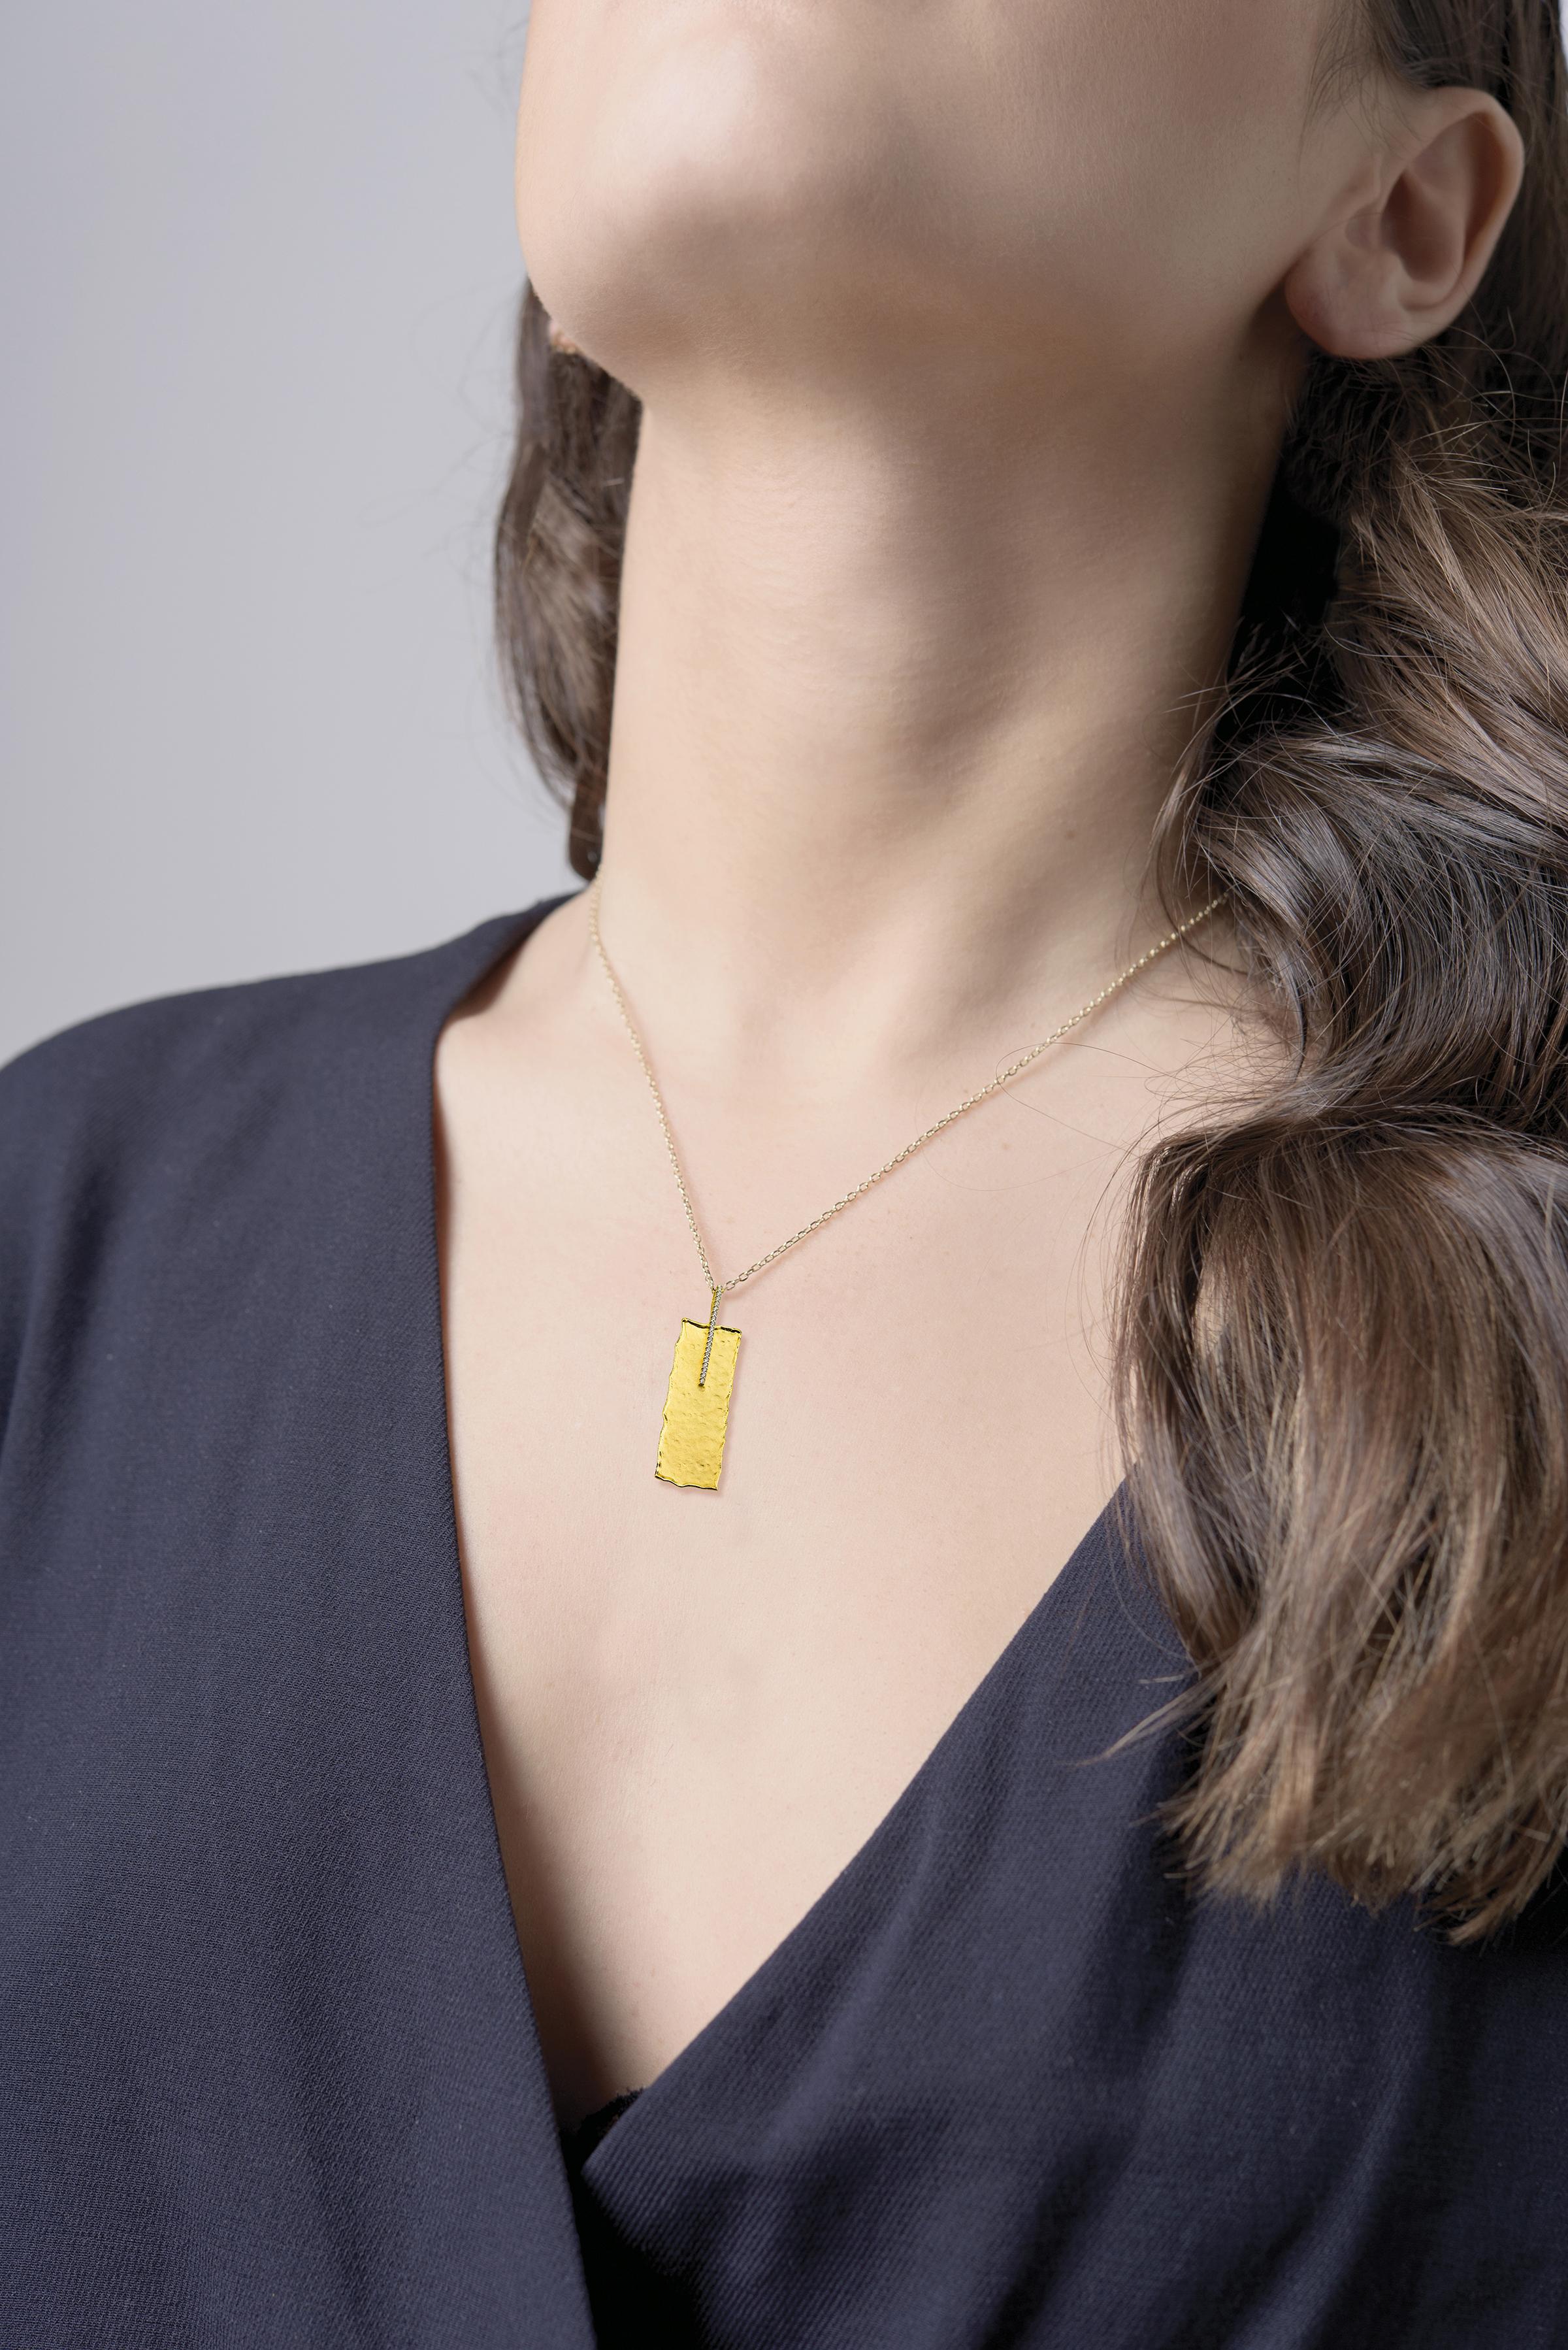 14 Karat Yellow Gold Hand-Crafted Matte and Hammer-Finished Scallop-Edged Rectangle Pendant, Accented with 0.11 Carats of a Pave Set Diamond Bar, Sliding on a 16